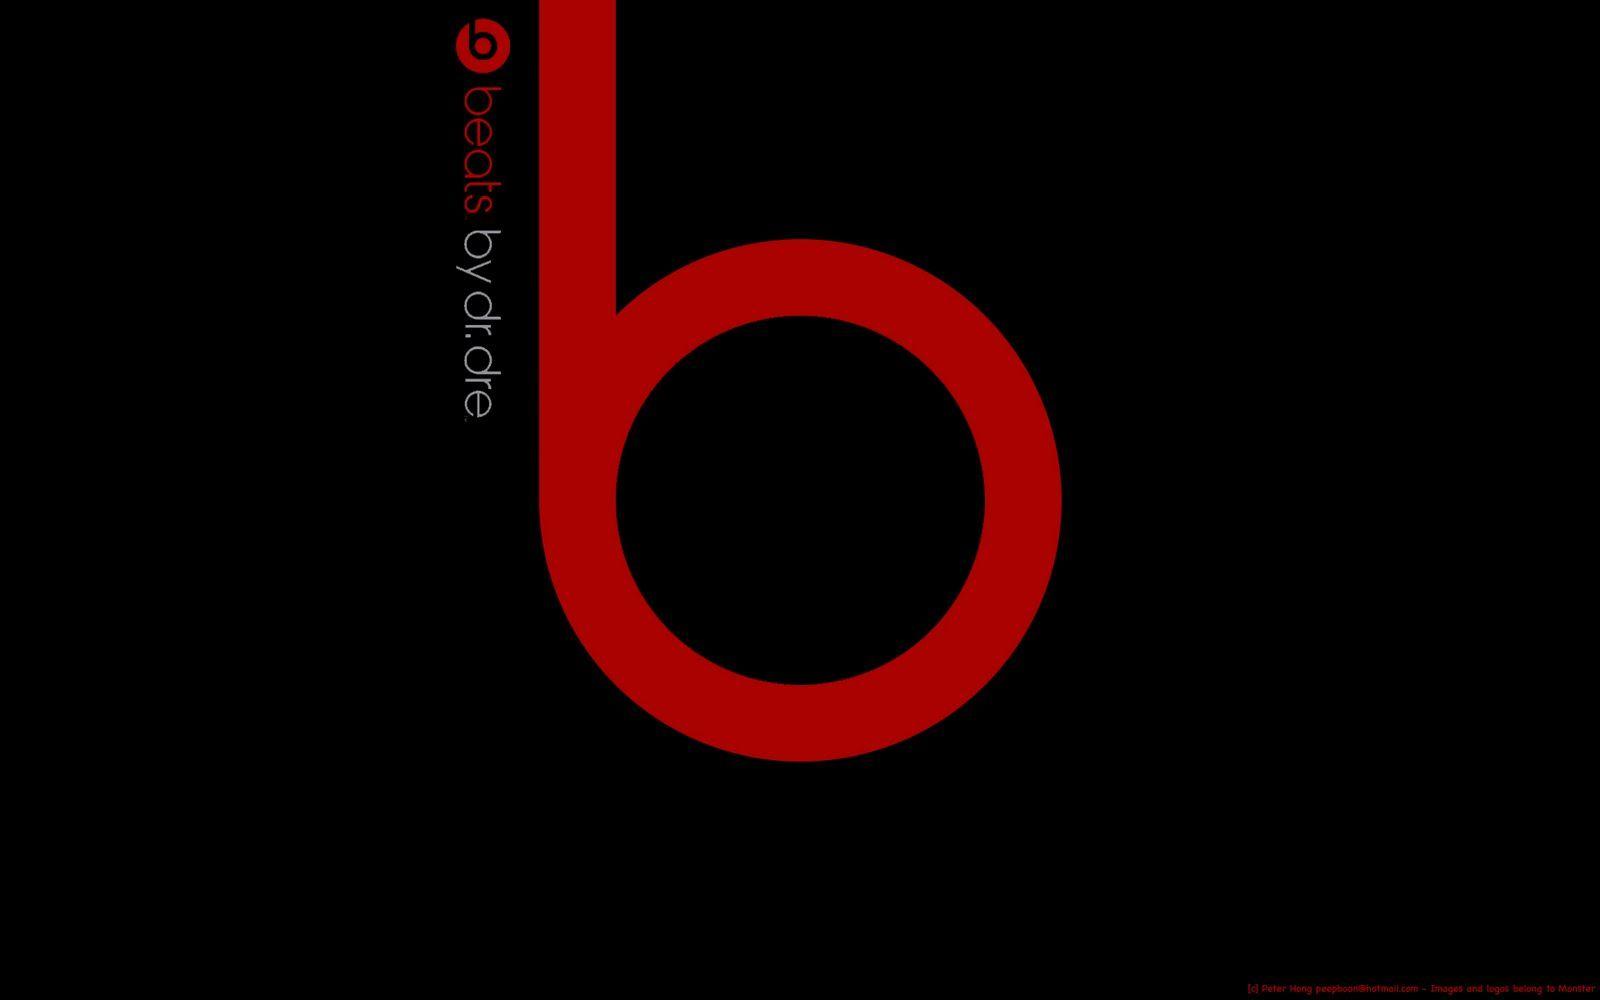 Red Beats Logo - Group of Beats By Dr Dre Logo Wallpaper Hd